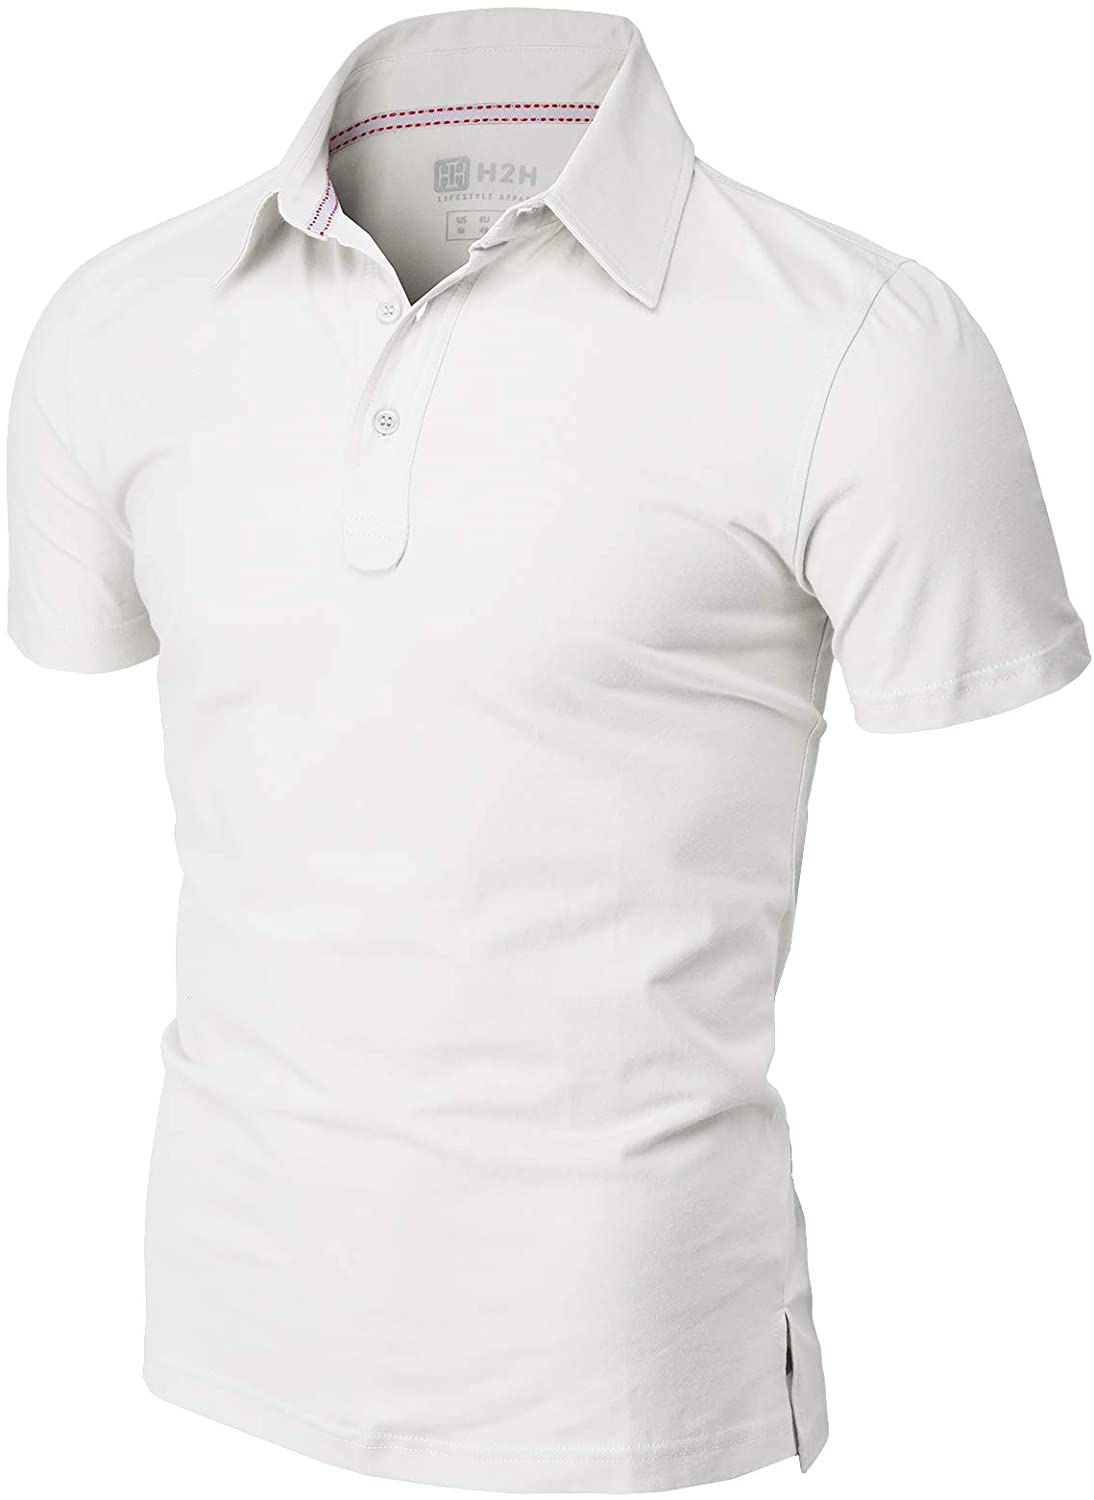 H2H Mens Casual Slim Fit Polo Shirts Short Sleeve Solid Various Styles